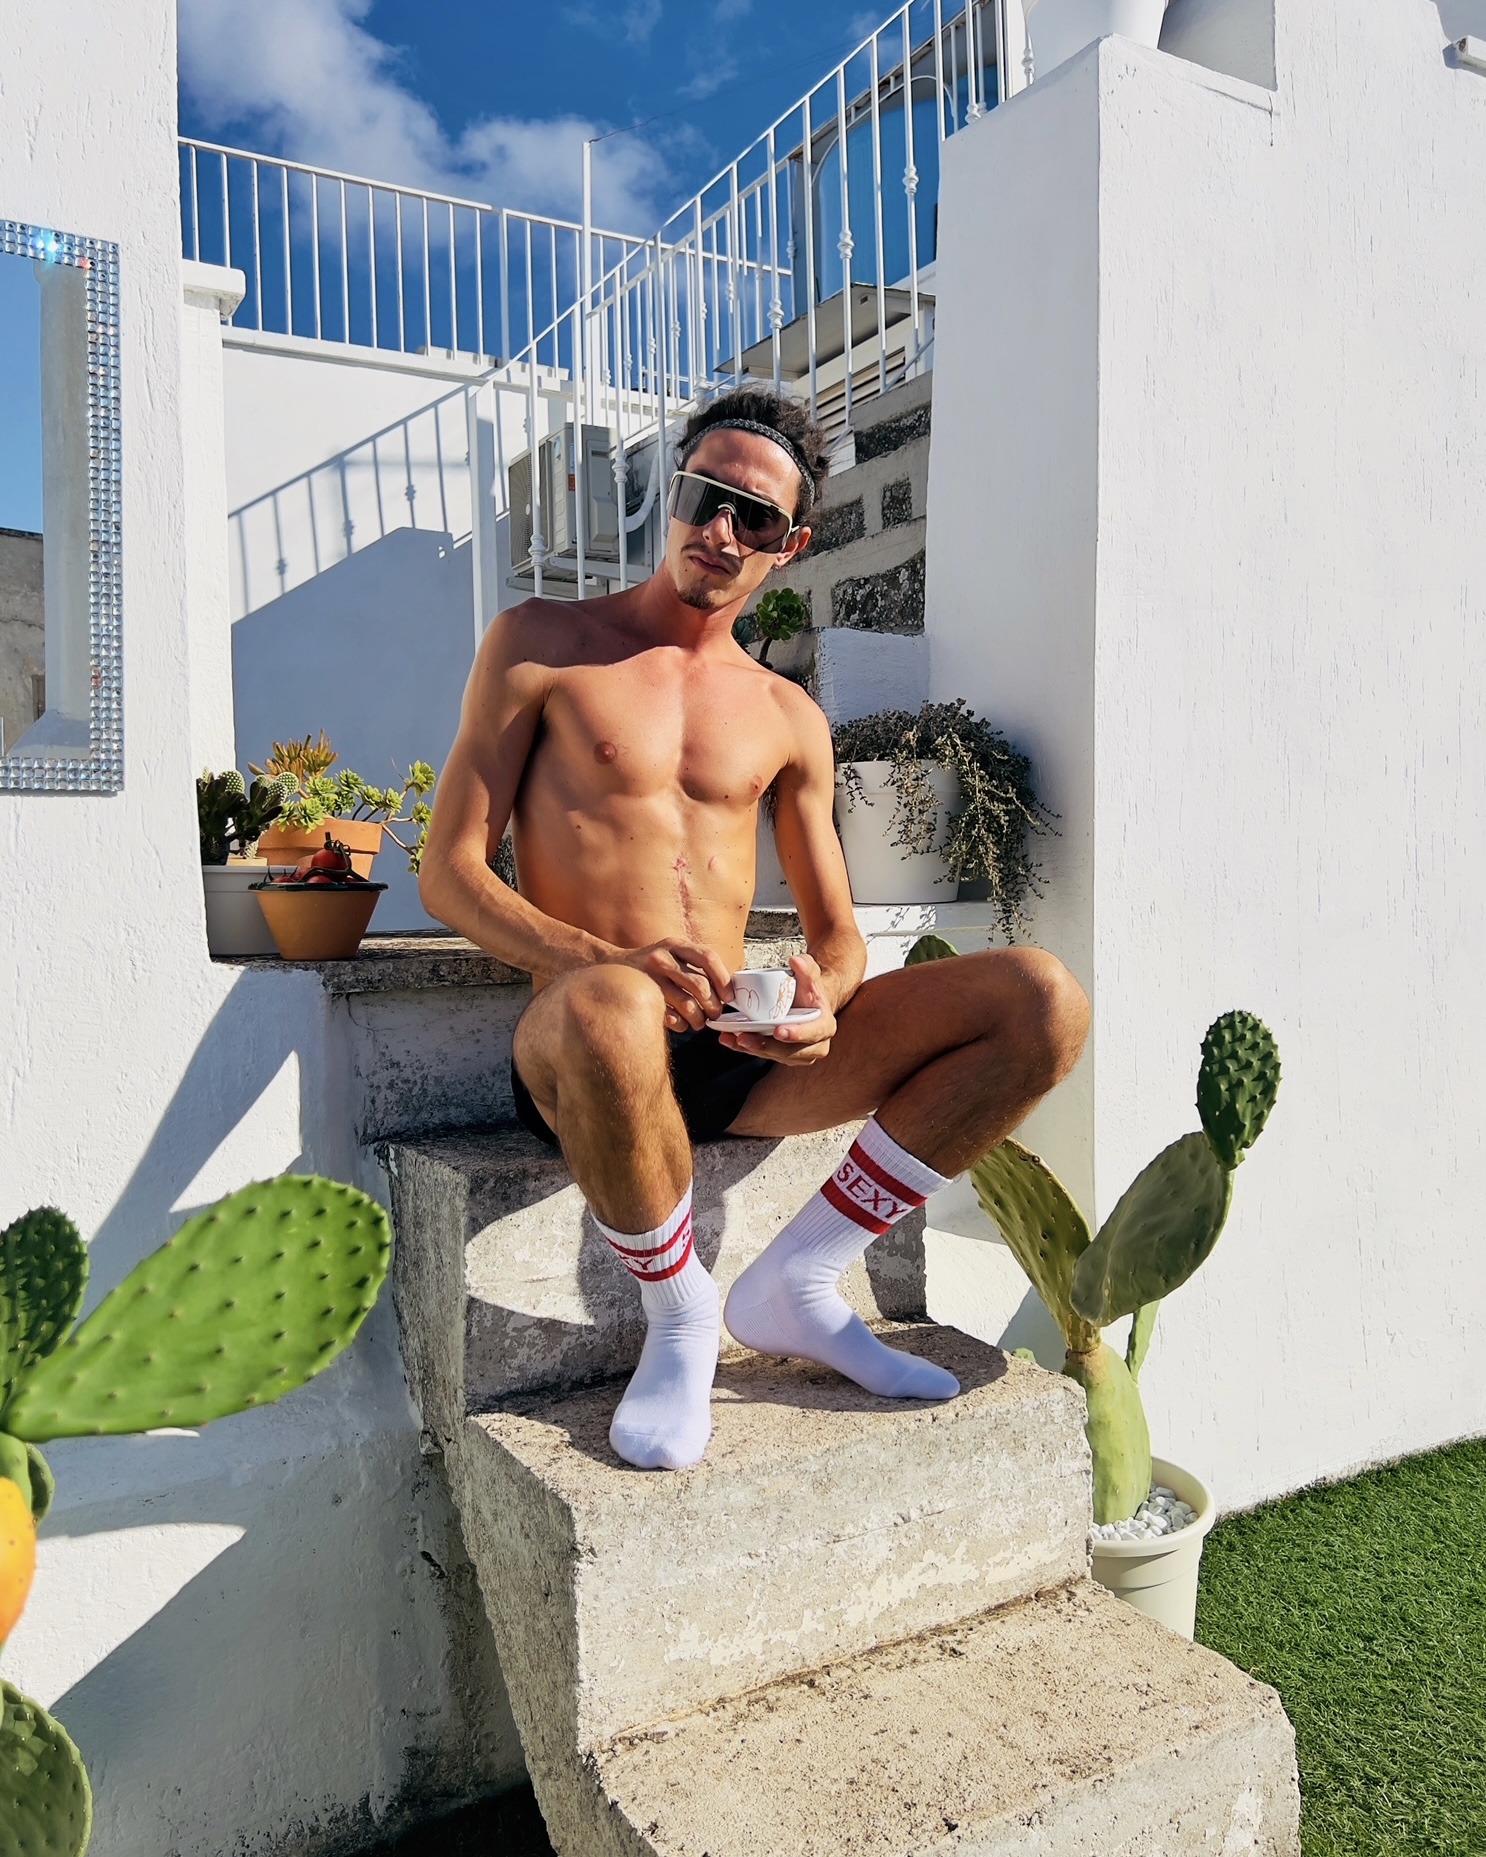 Relax in style the best gay and gay friendly accommodation in Puglia. Ostuni is Puglia’s gay urban destination gay travel gay Puglia gay Italy. Apartment q/40 is our top gay rental apartment accommodation Ostuni.